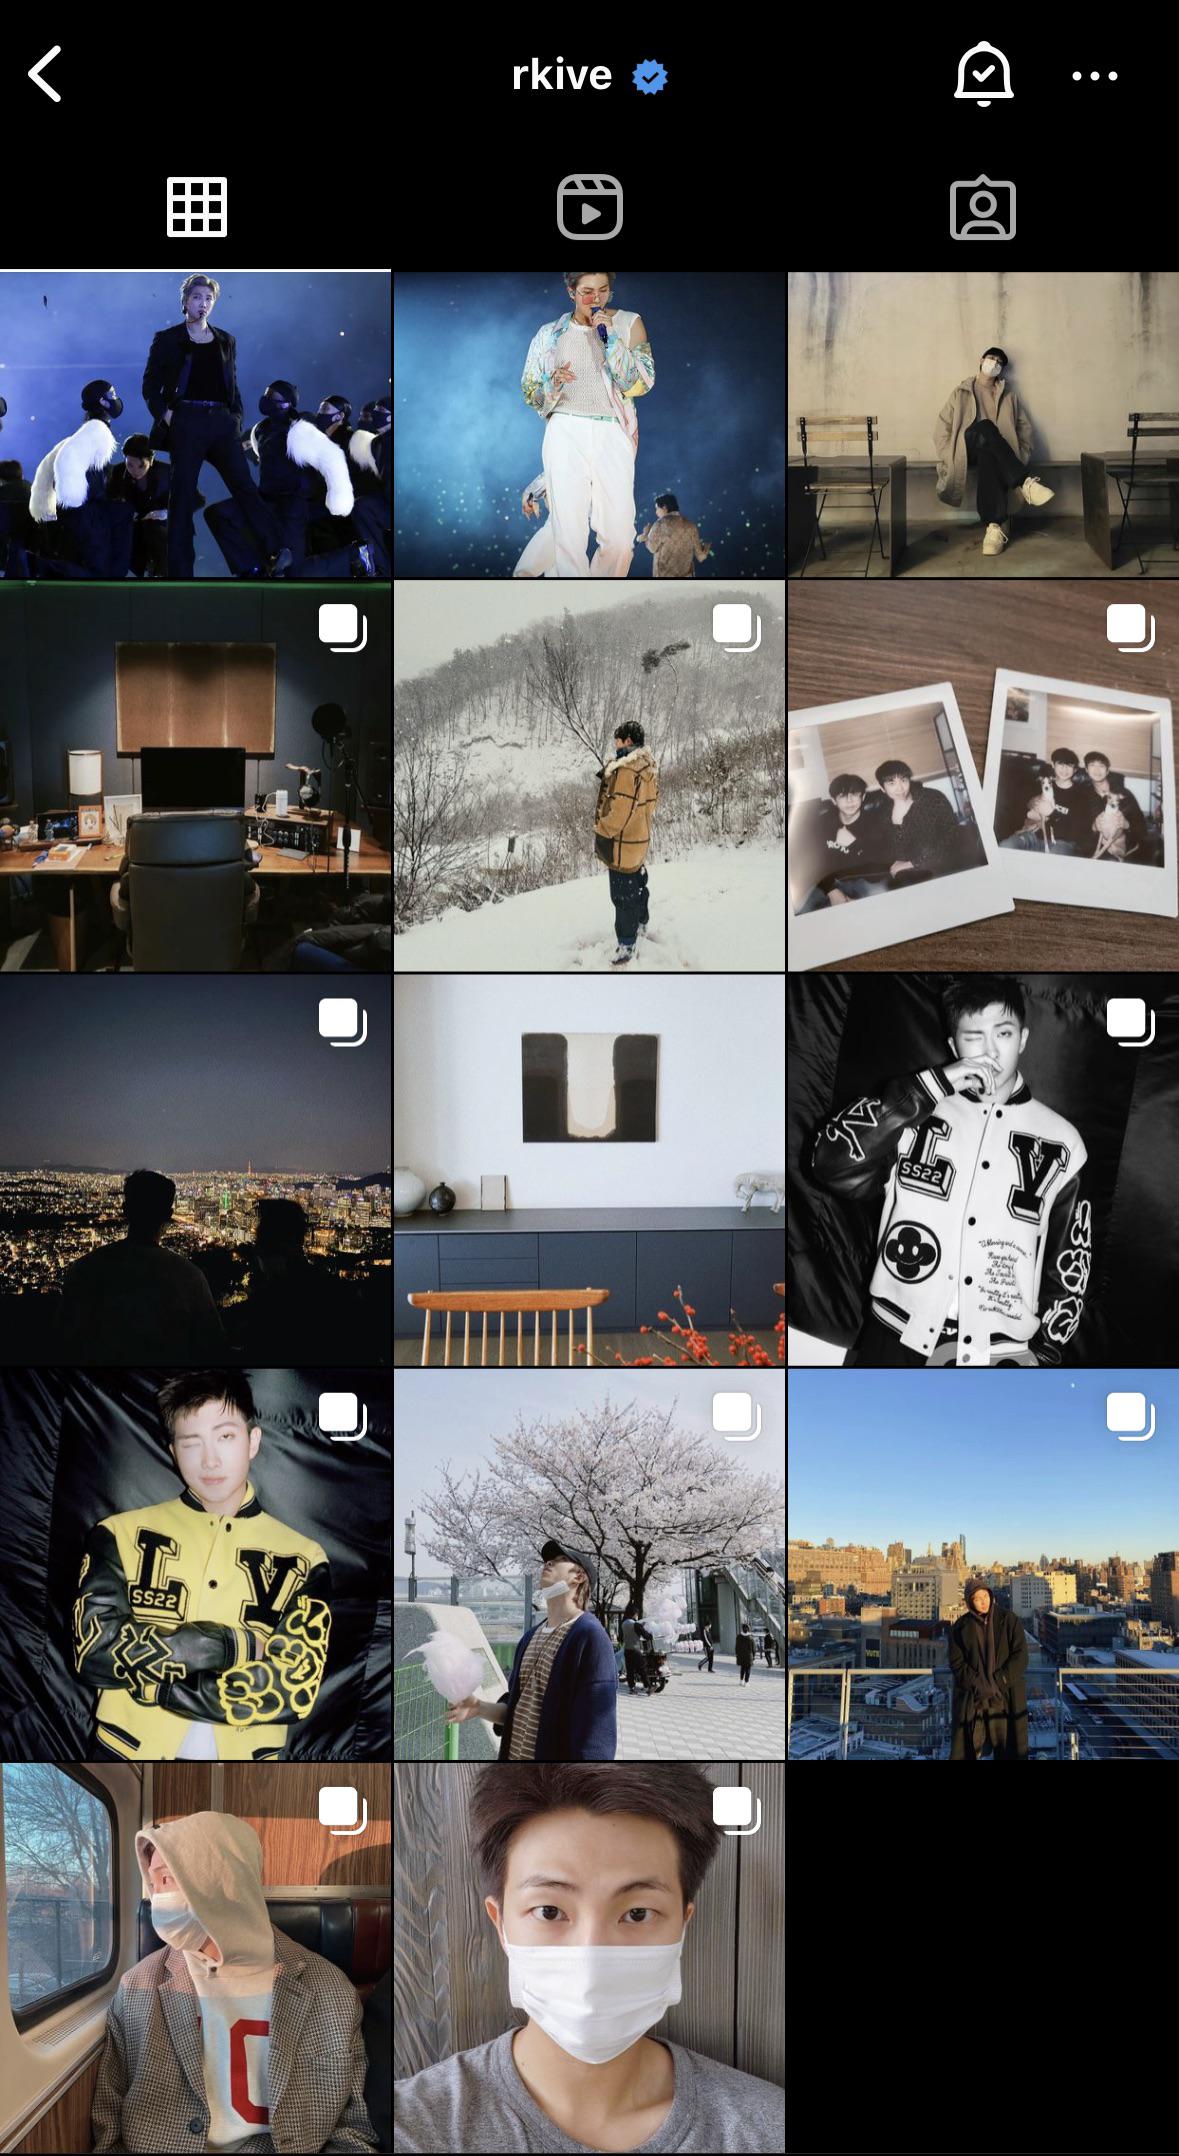 230914 RM has unarchived some of his old posts on Instagram